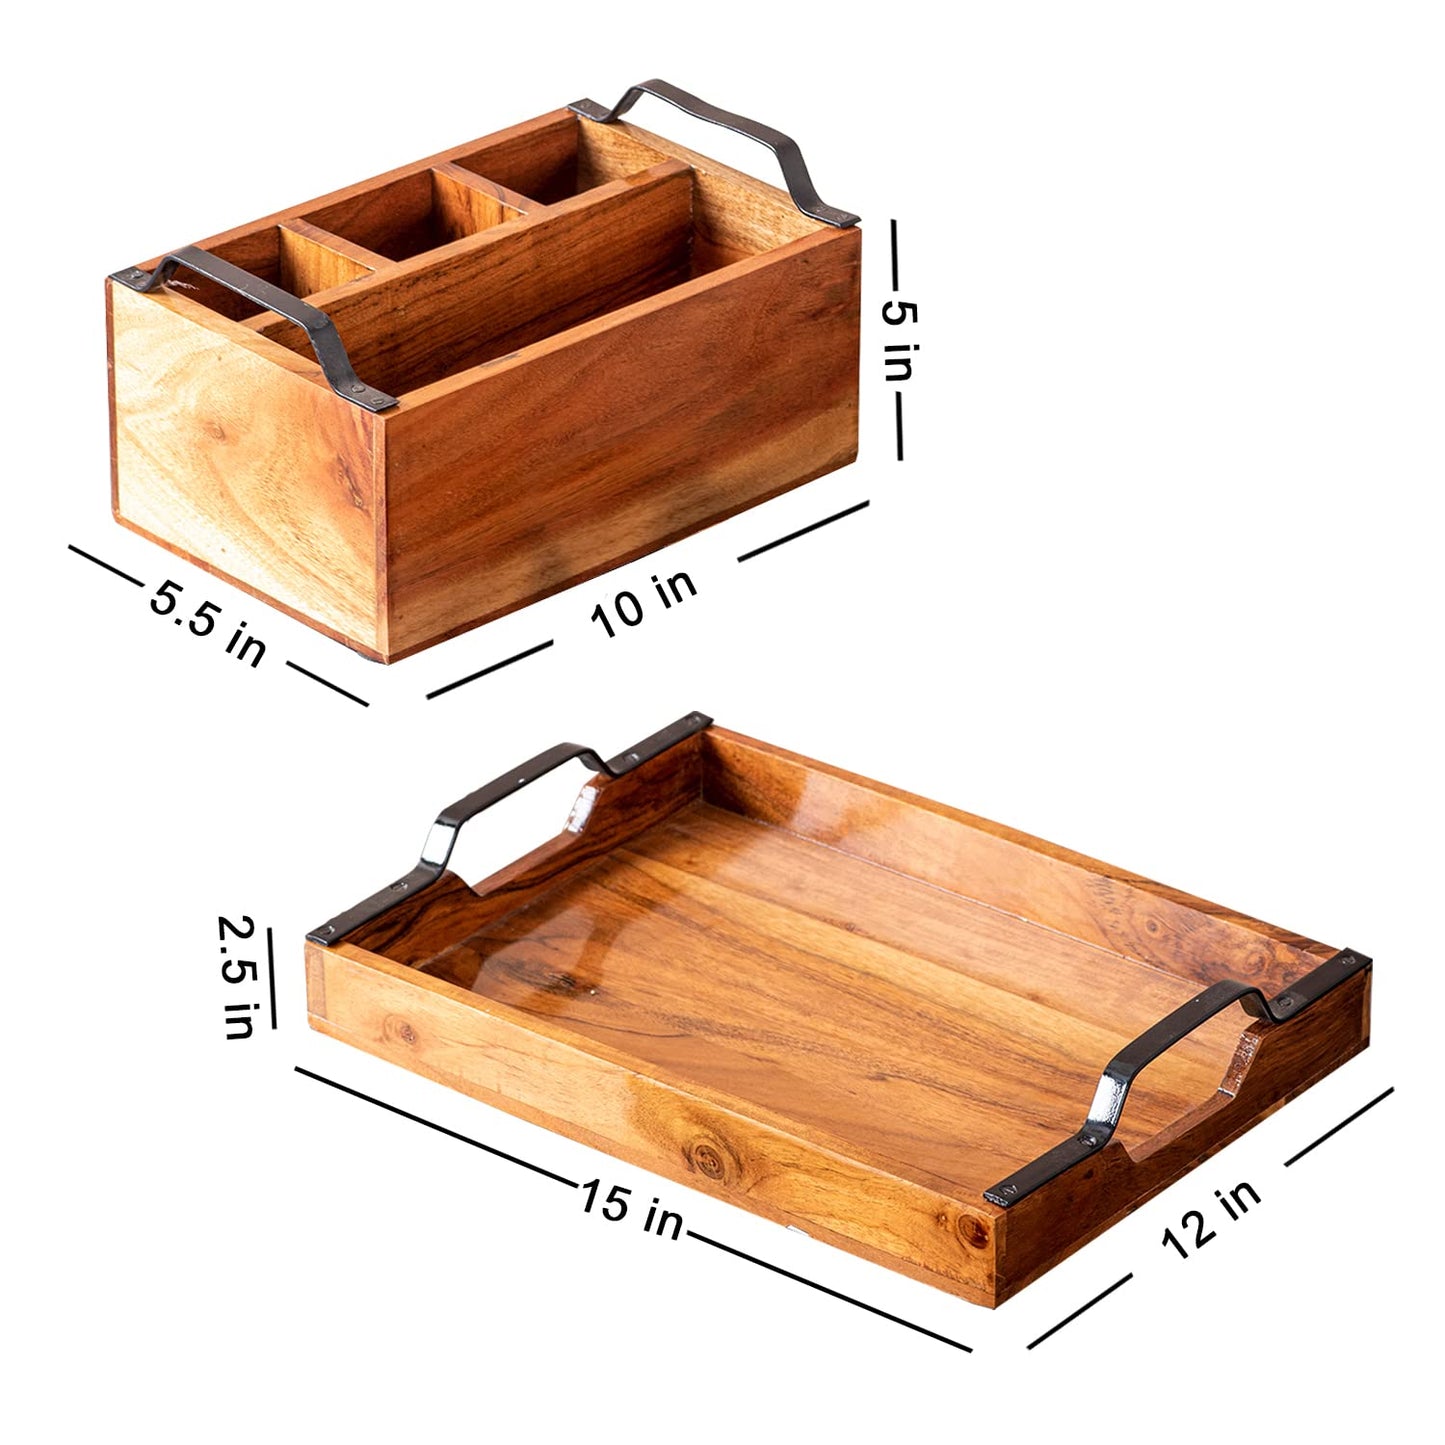 Buy Acacia Wood Spoon Stand with Serving Tray Online